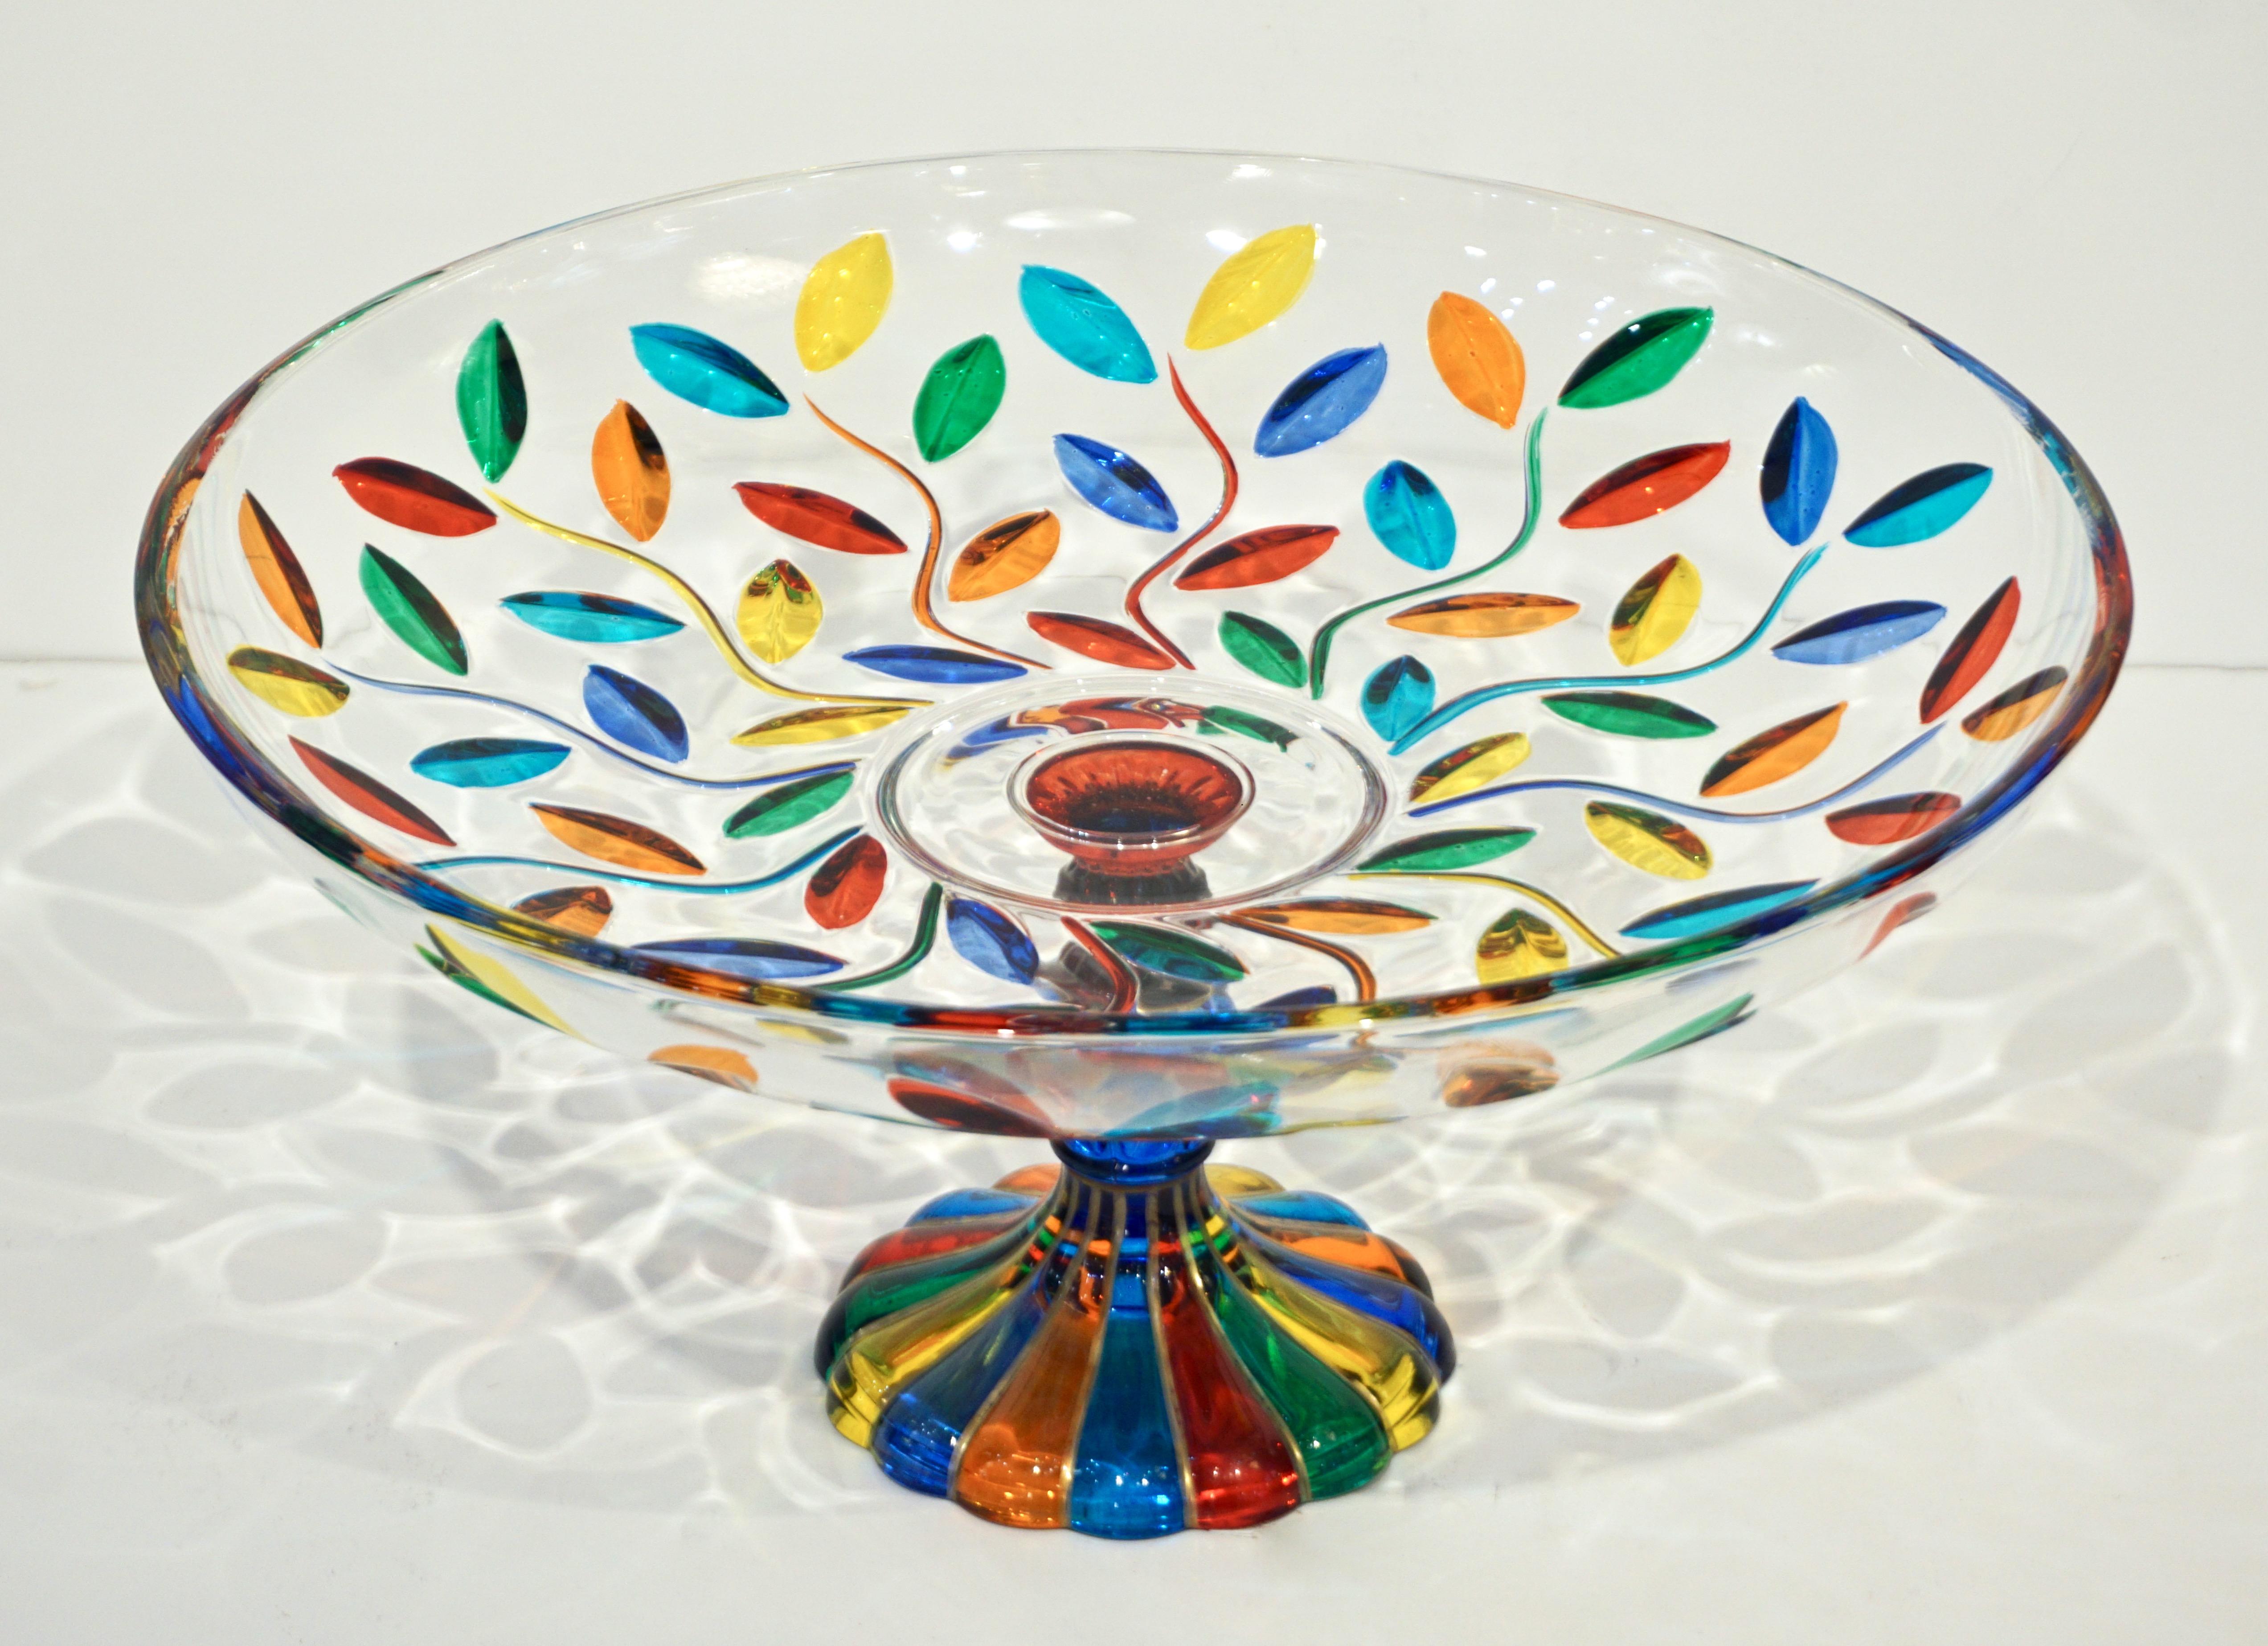 Colleoni Modern Crystal Murano Glass Compote Dish / Tazza with Colorful Leaves 1